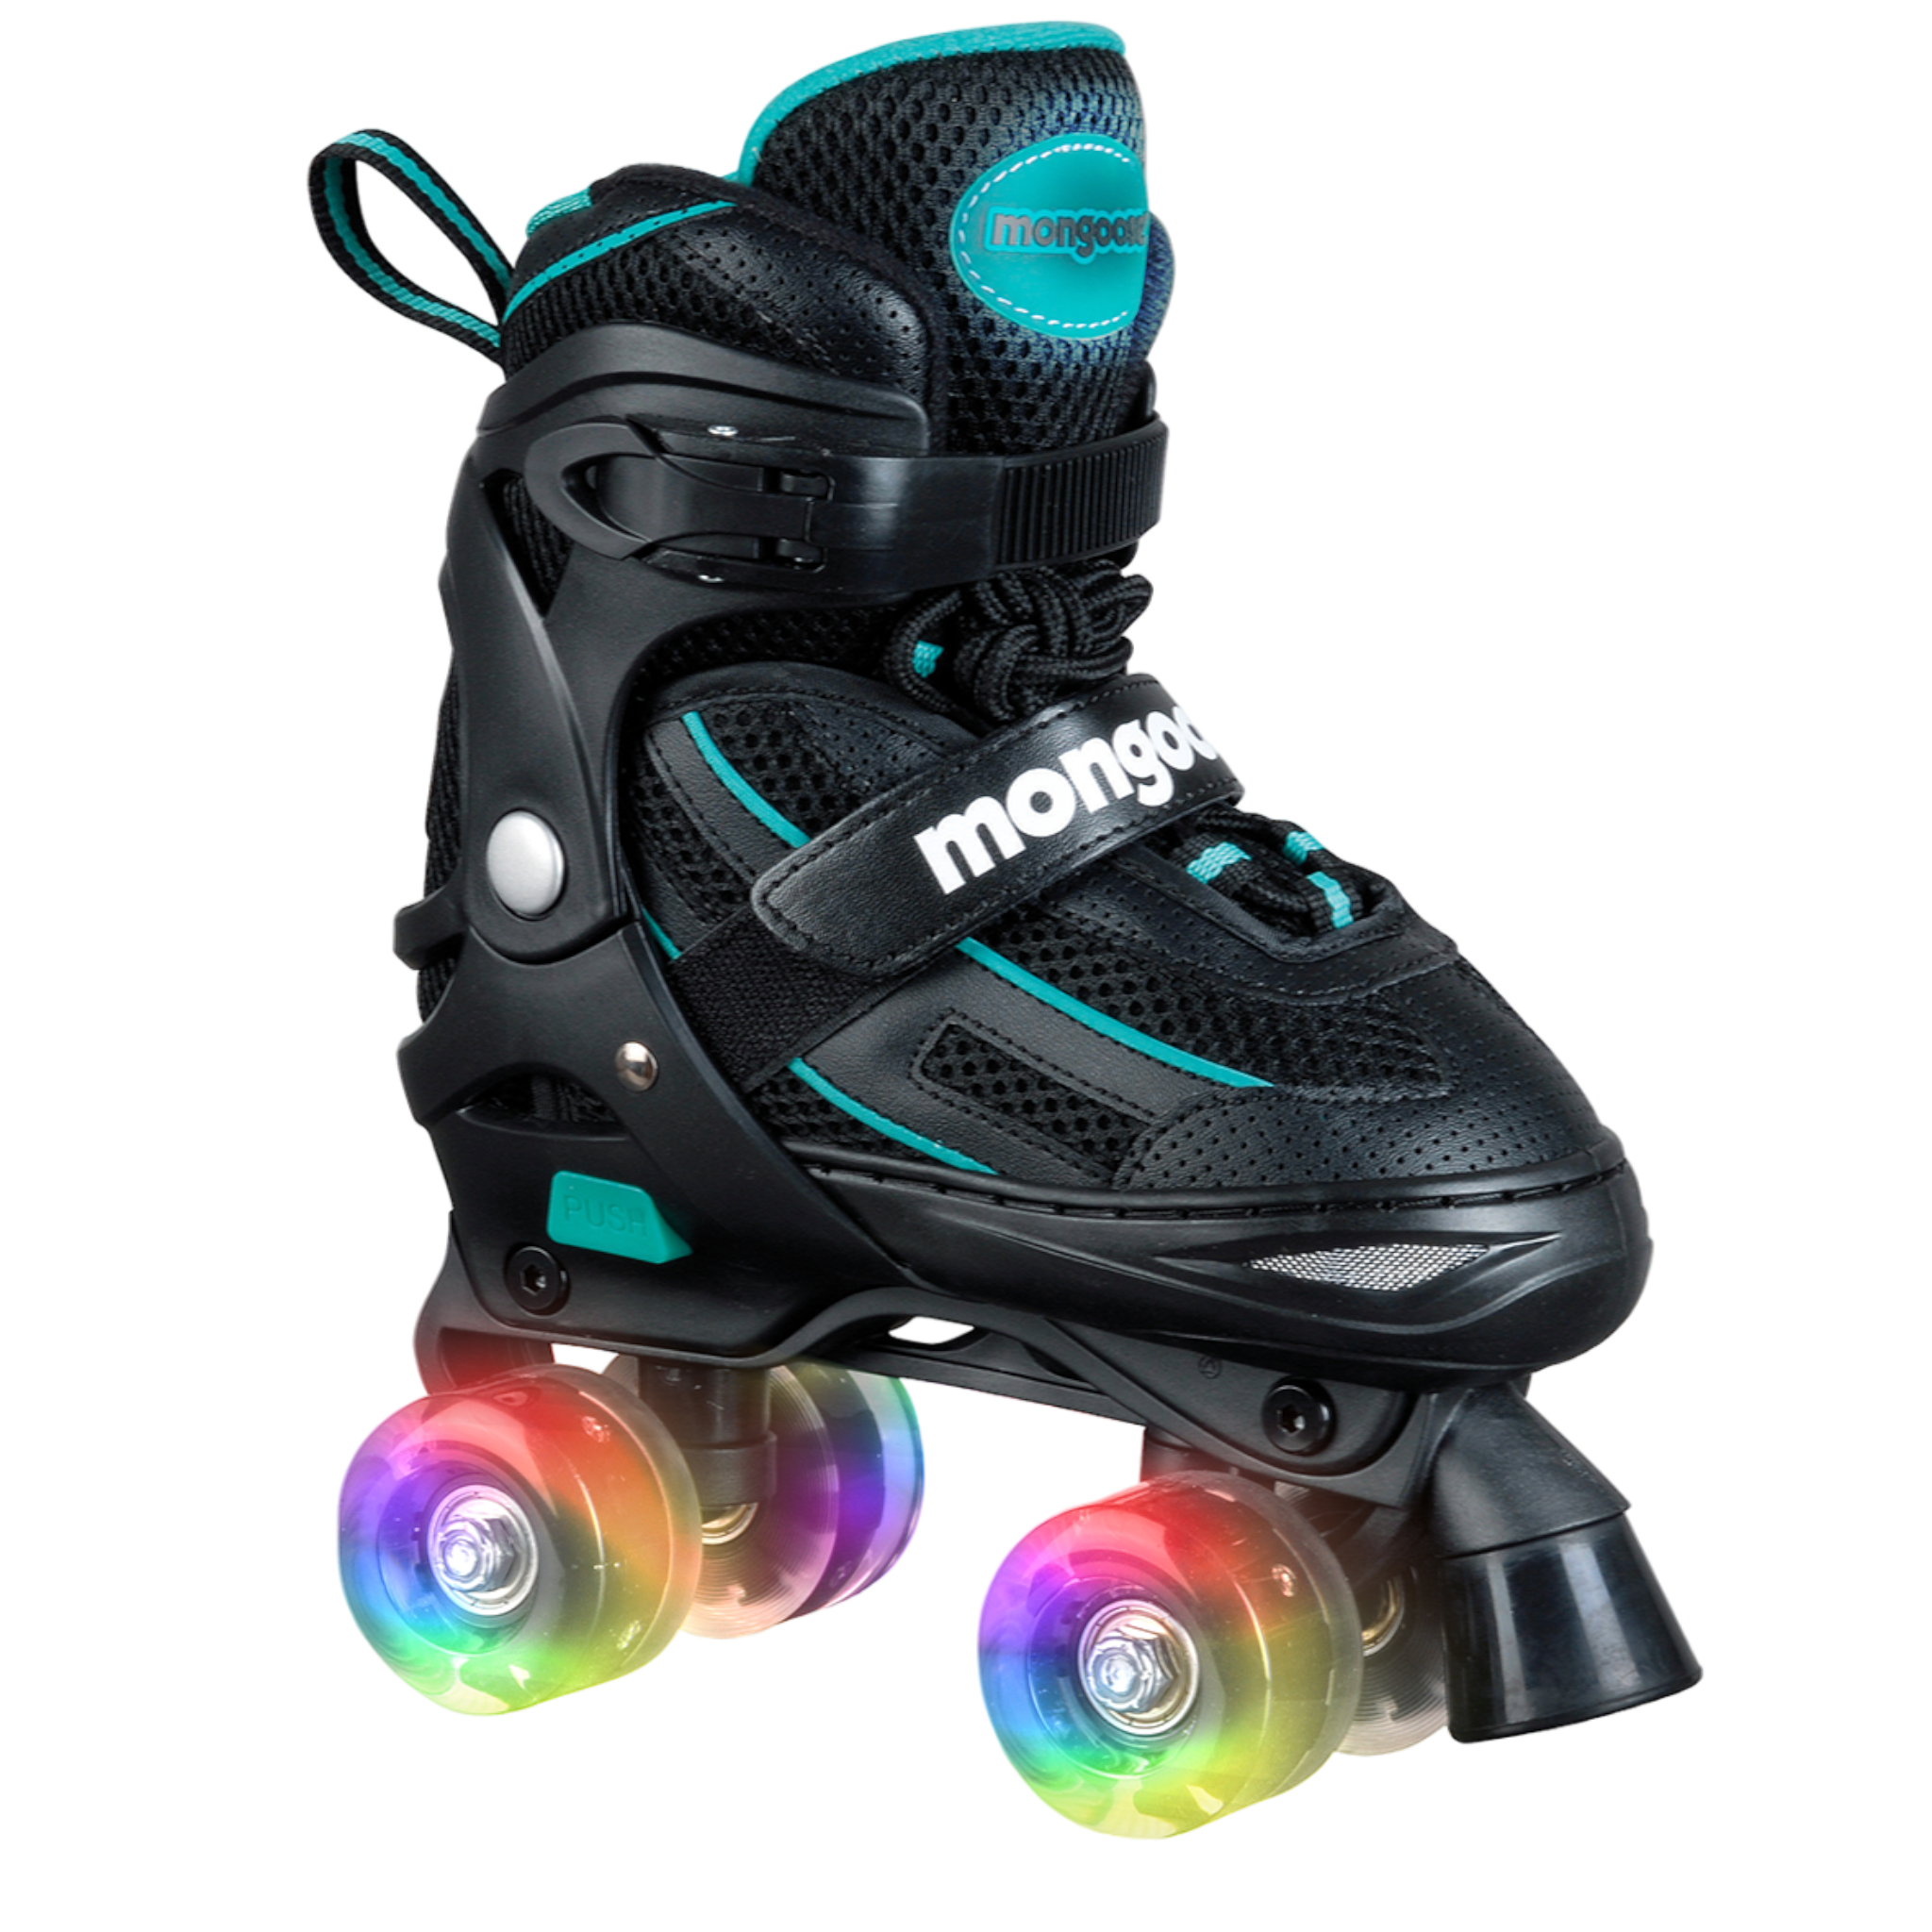 Mongoose Kids Roller Skates.  Adjustable youth sizes 1-4 for Boys or Girls.  LED Light Up Quad Skate Wheels to add more fun to childrens skating. - Pro-Distributing